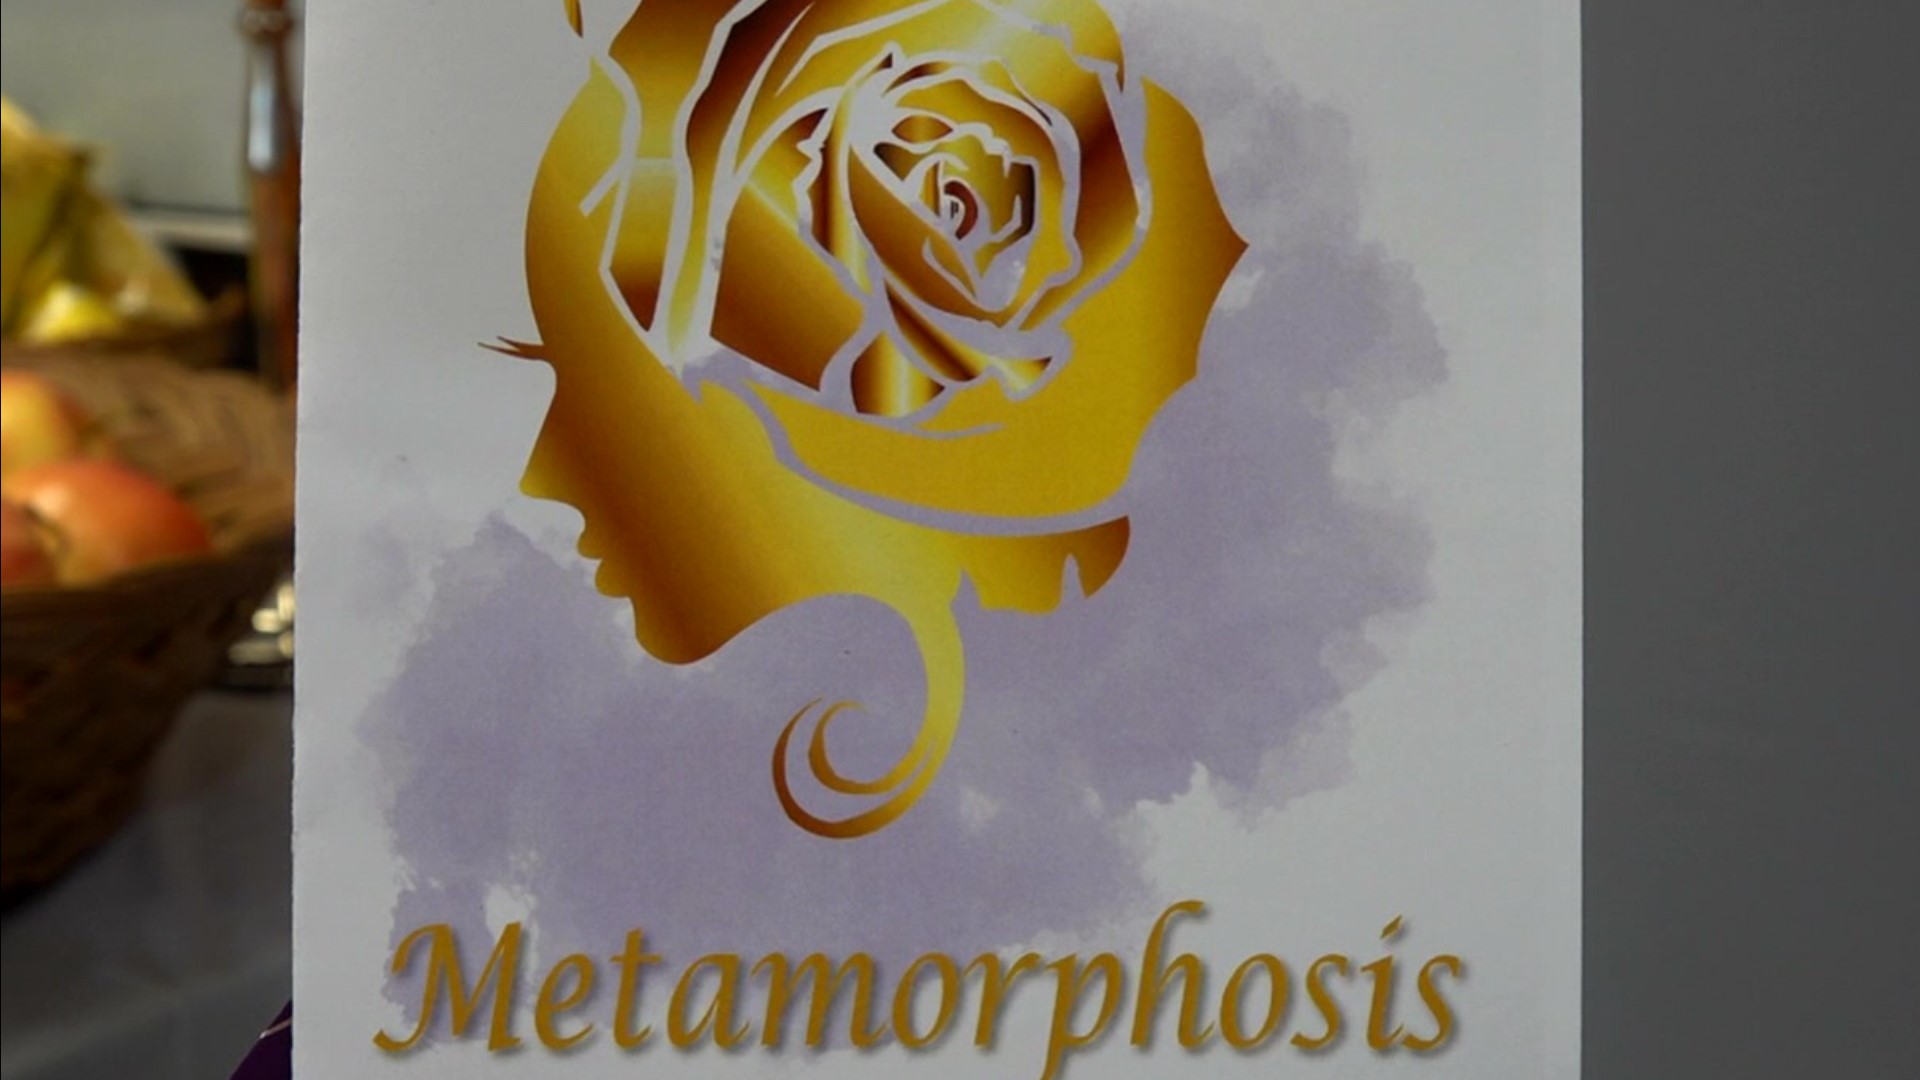 Metamorphosis Women's Empowerment Initiative is all about women helping women, and they have a lot to celebrate this weekend in Monroe County.